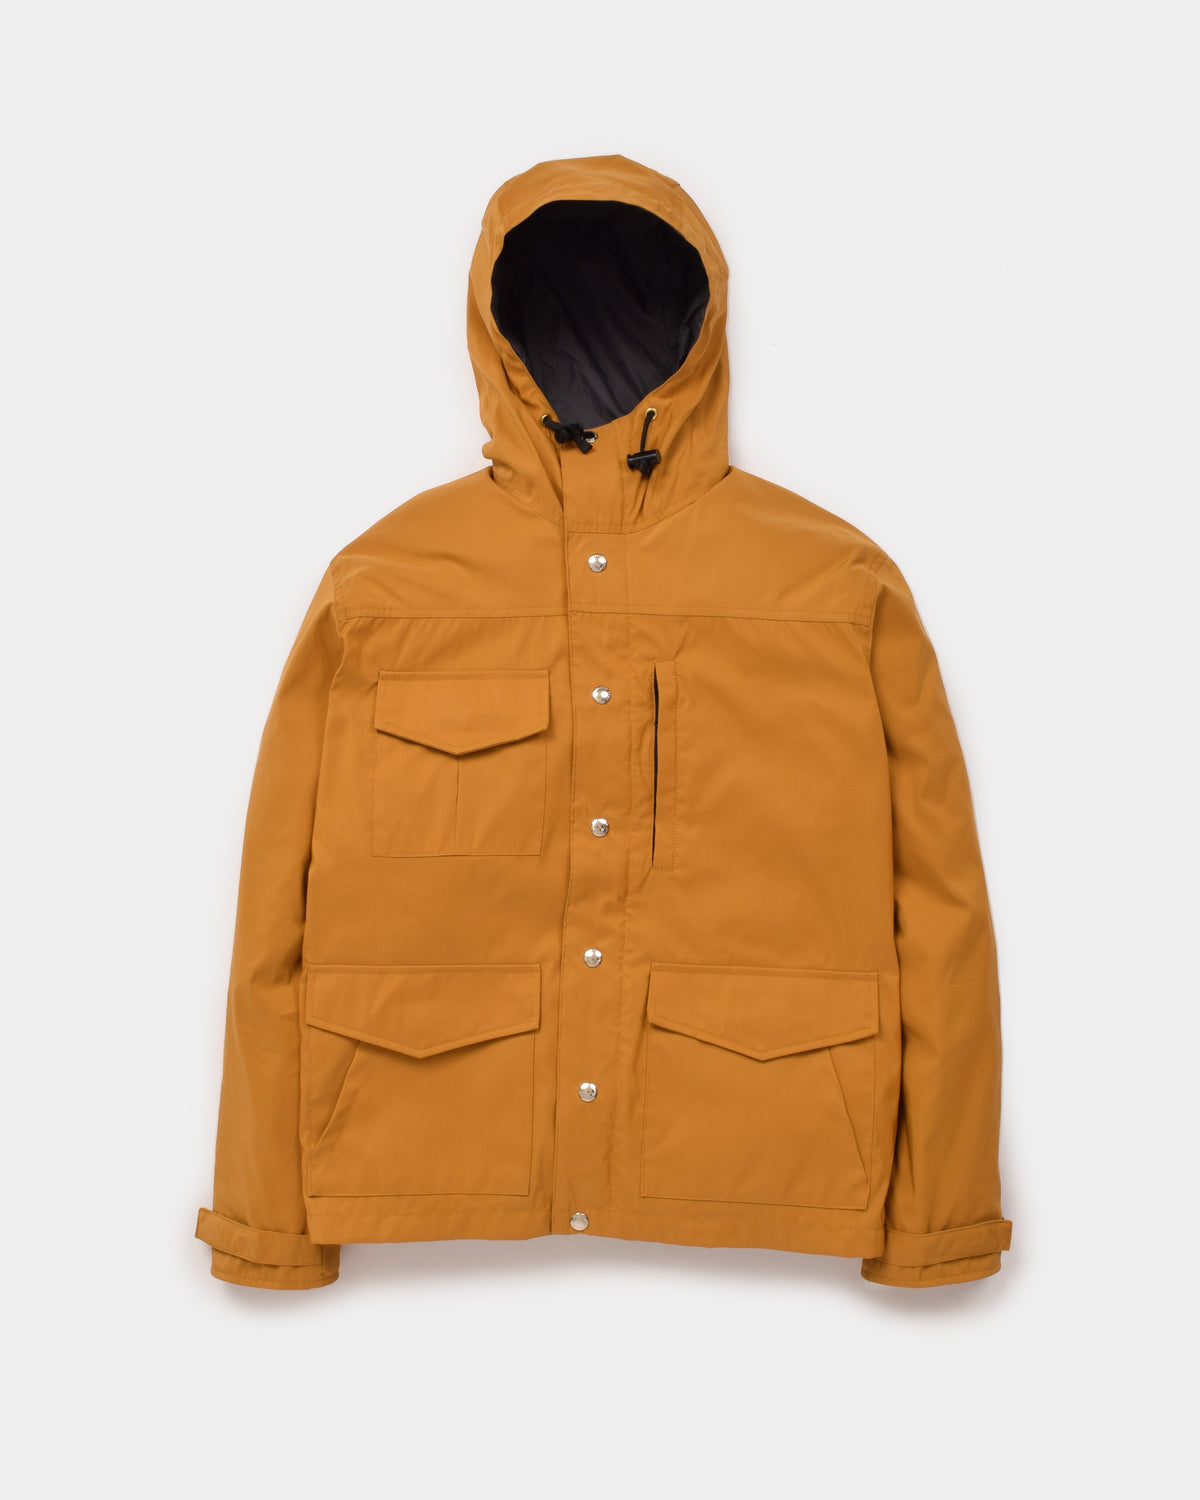 Michi Jacket in Mustard showing front